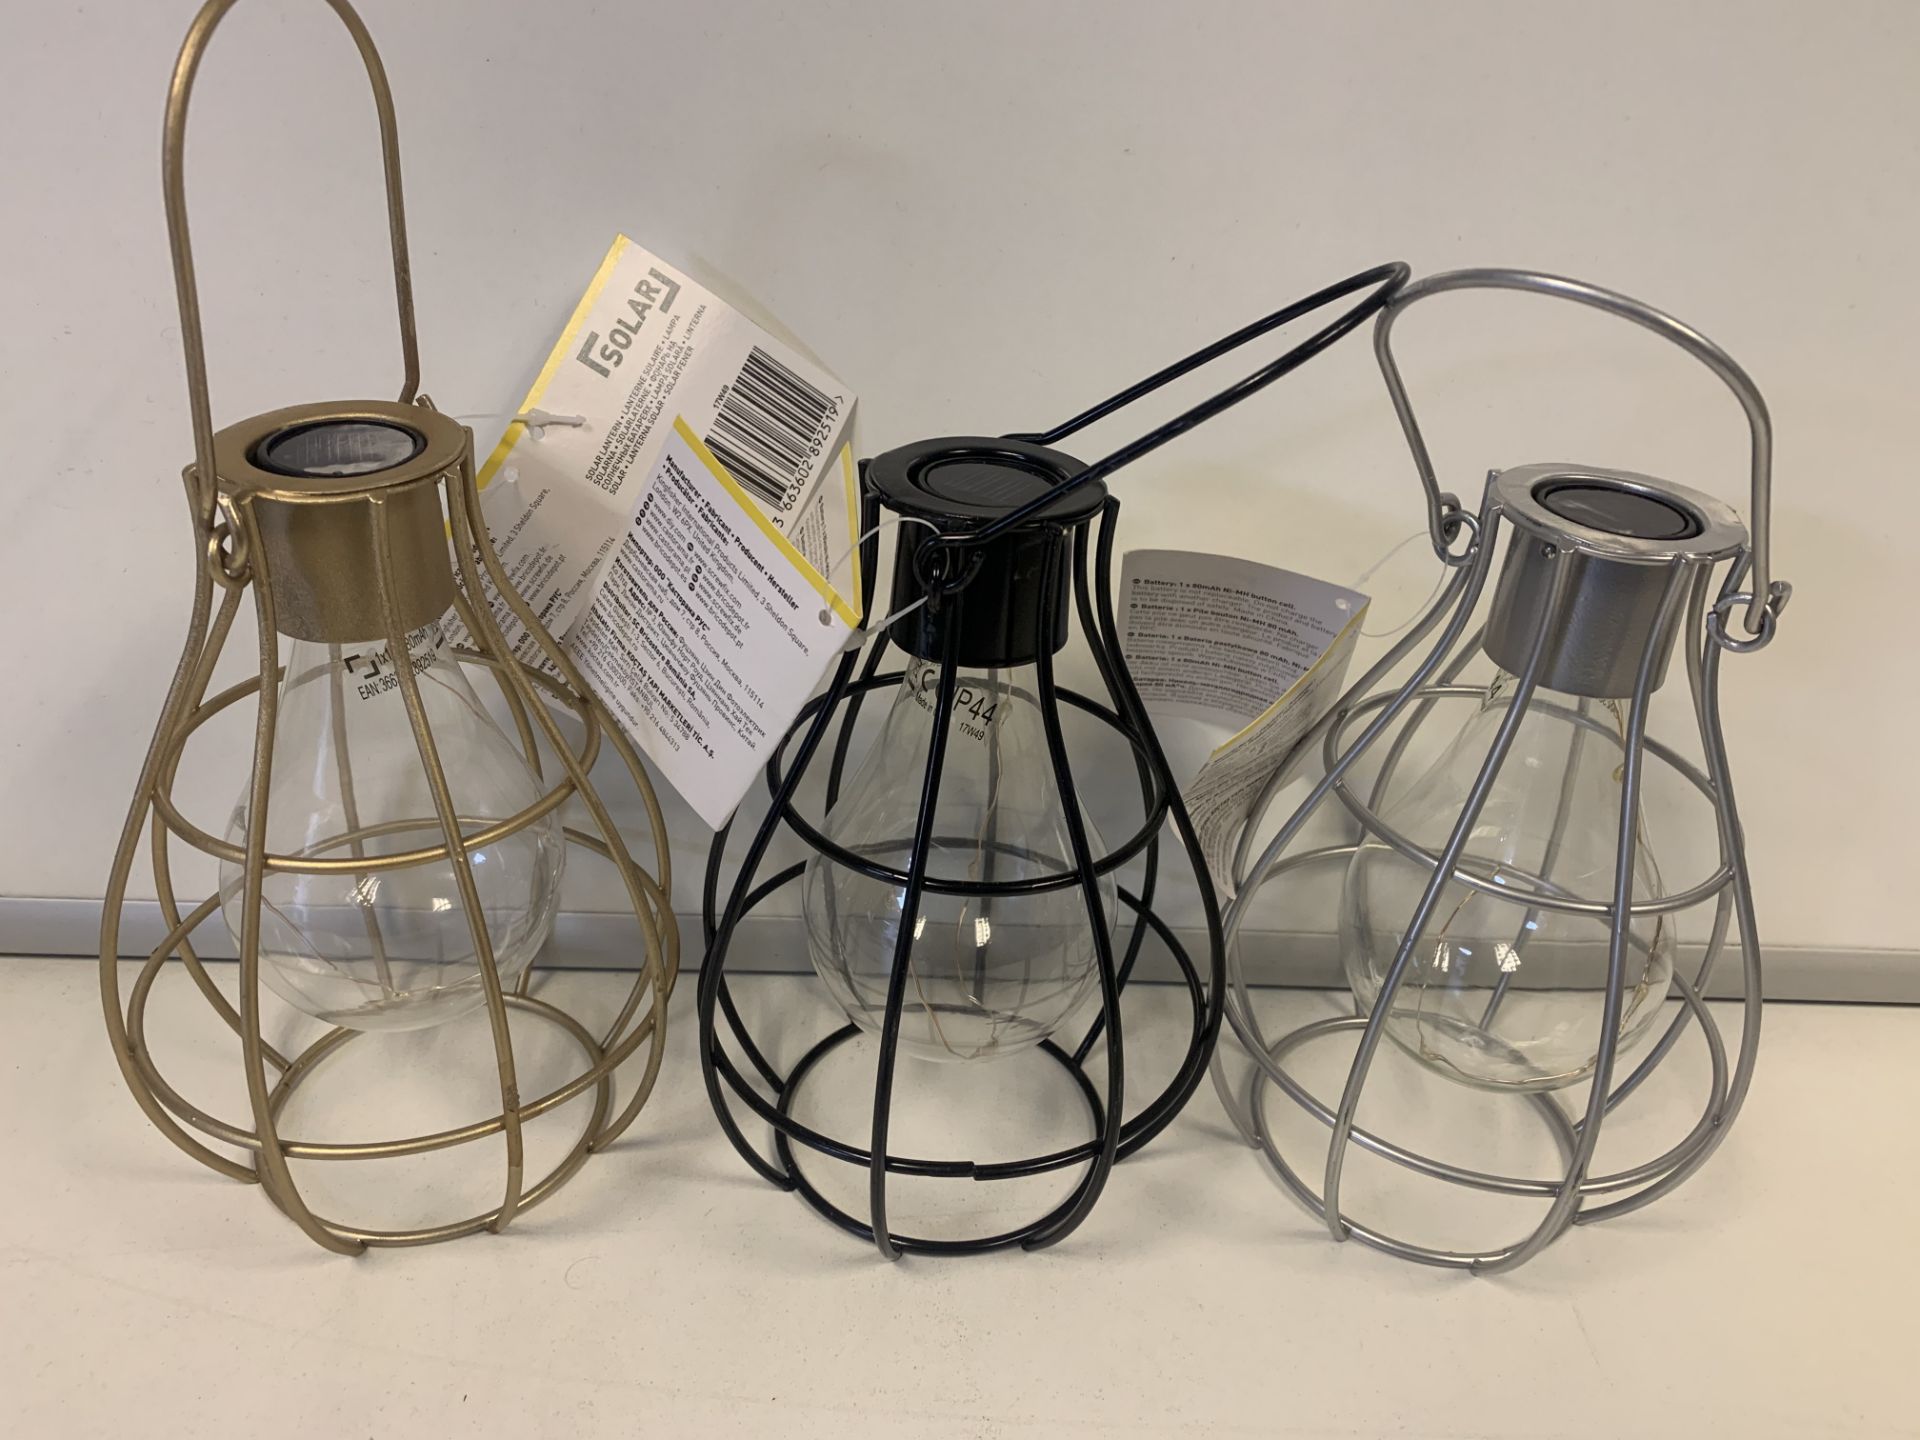 24 x NEW SEALED SOLAR CAGE LANTERNS IN VARIOUS COLOURS - BLACK, SILVER, GOLD ETC